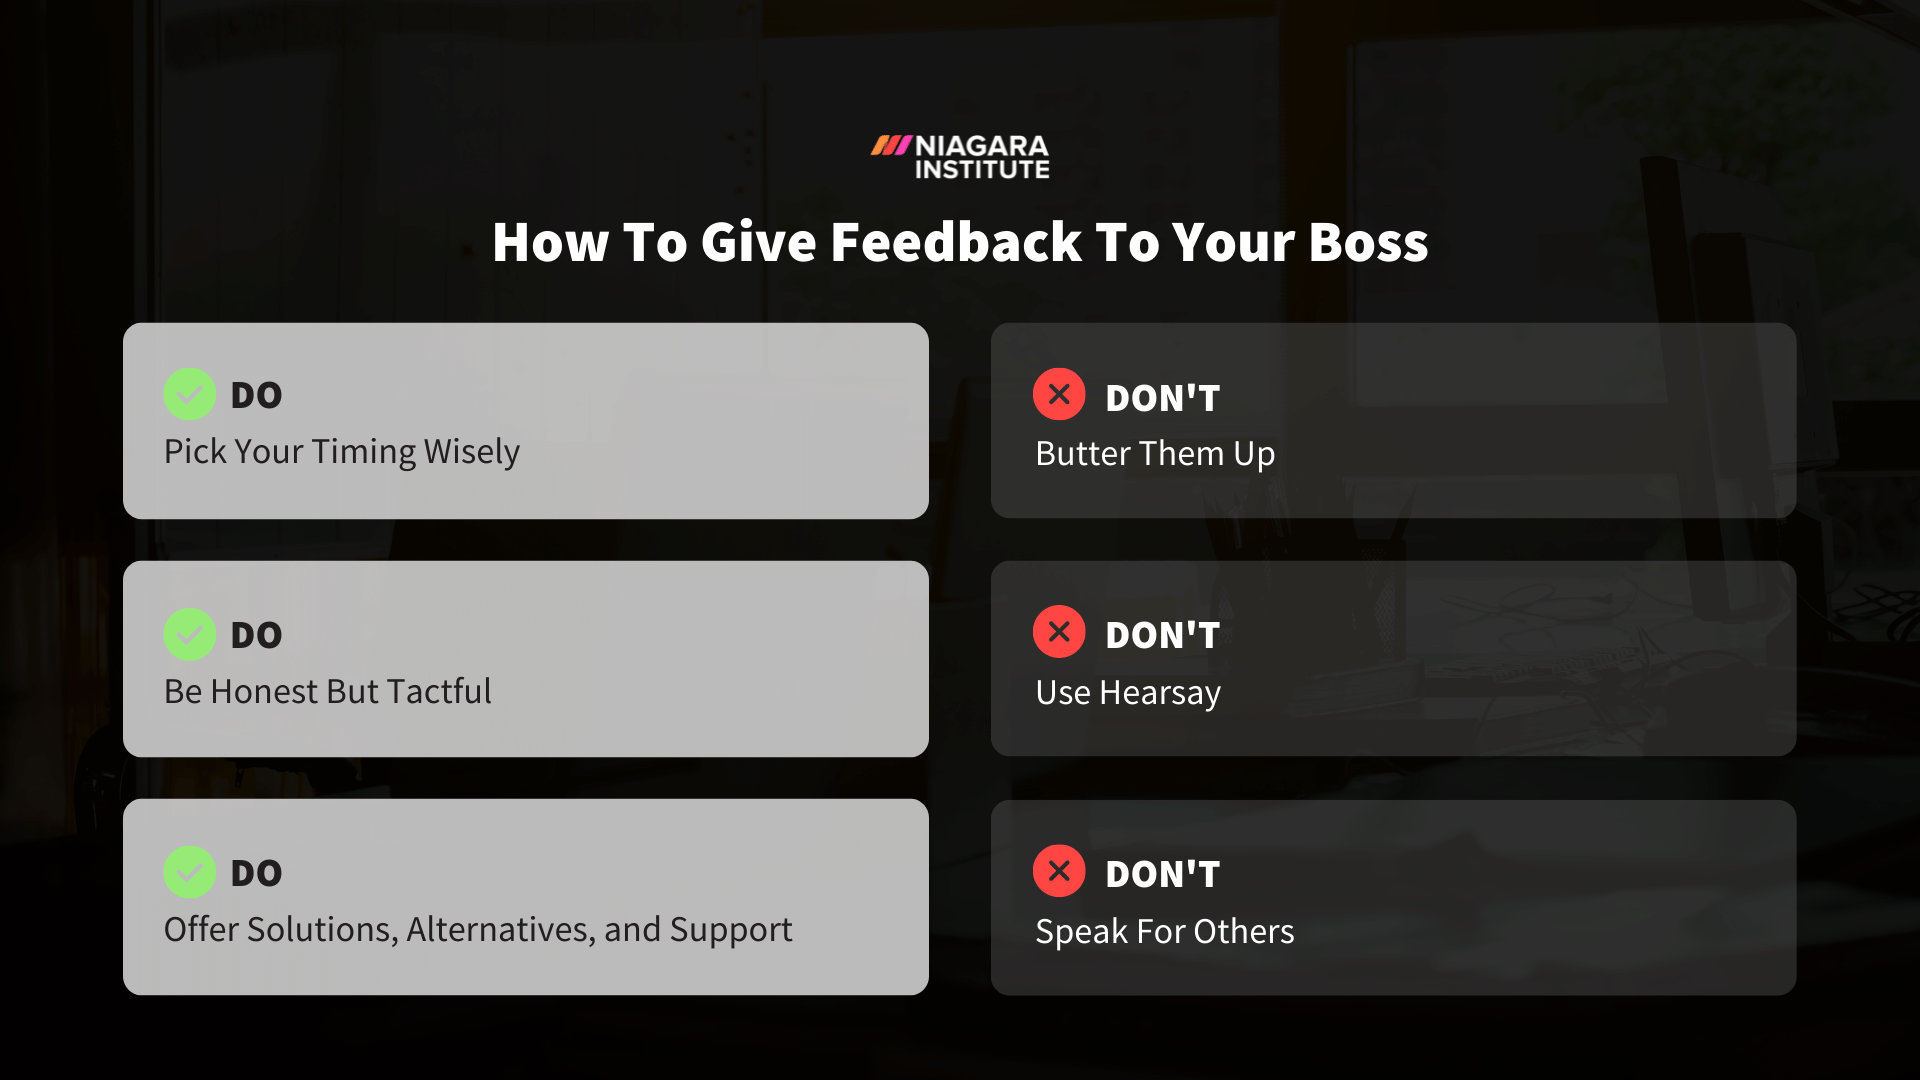 How To Give Feedback To Your Boss  - Niagara Institute (1)